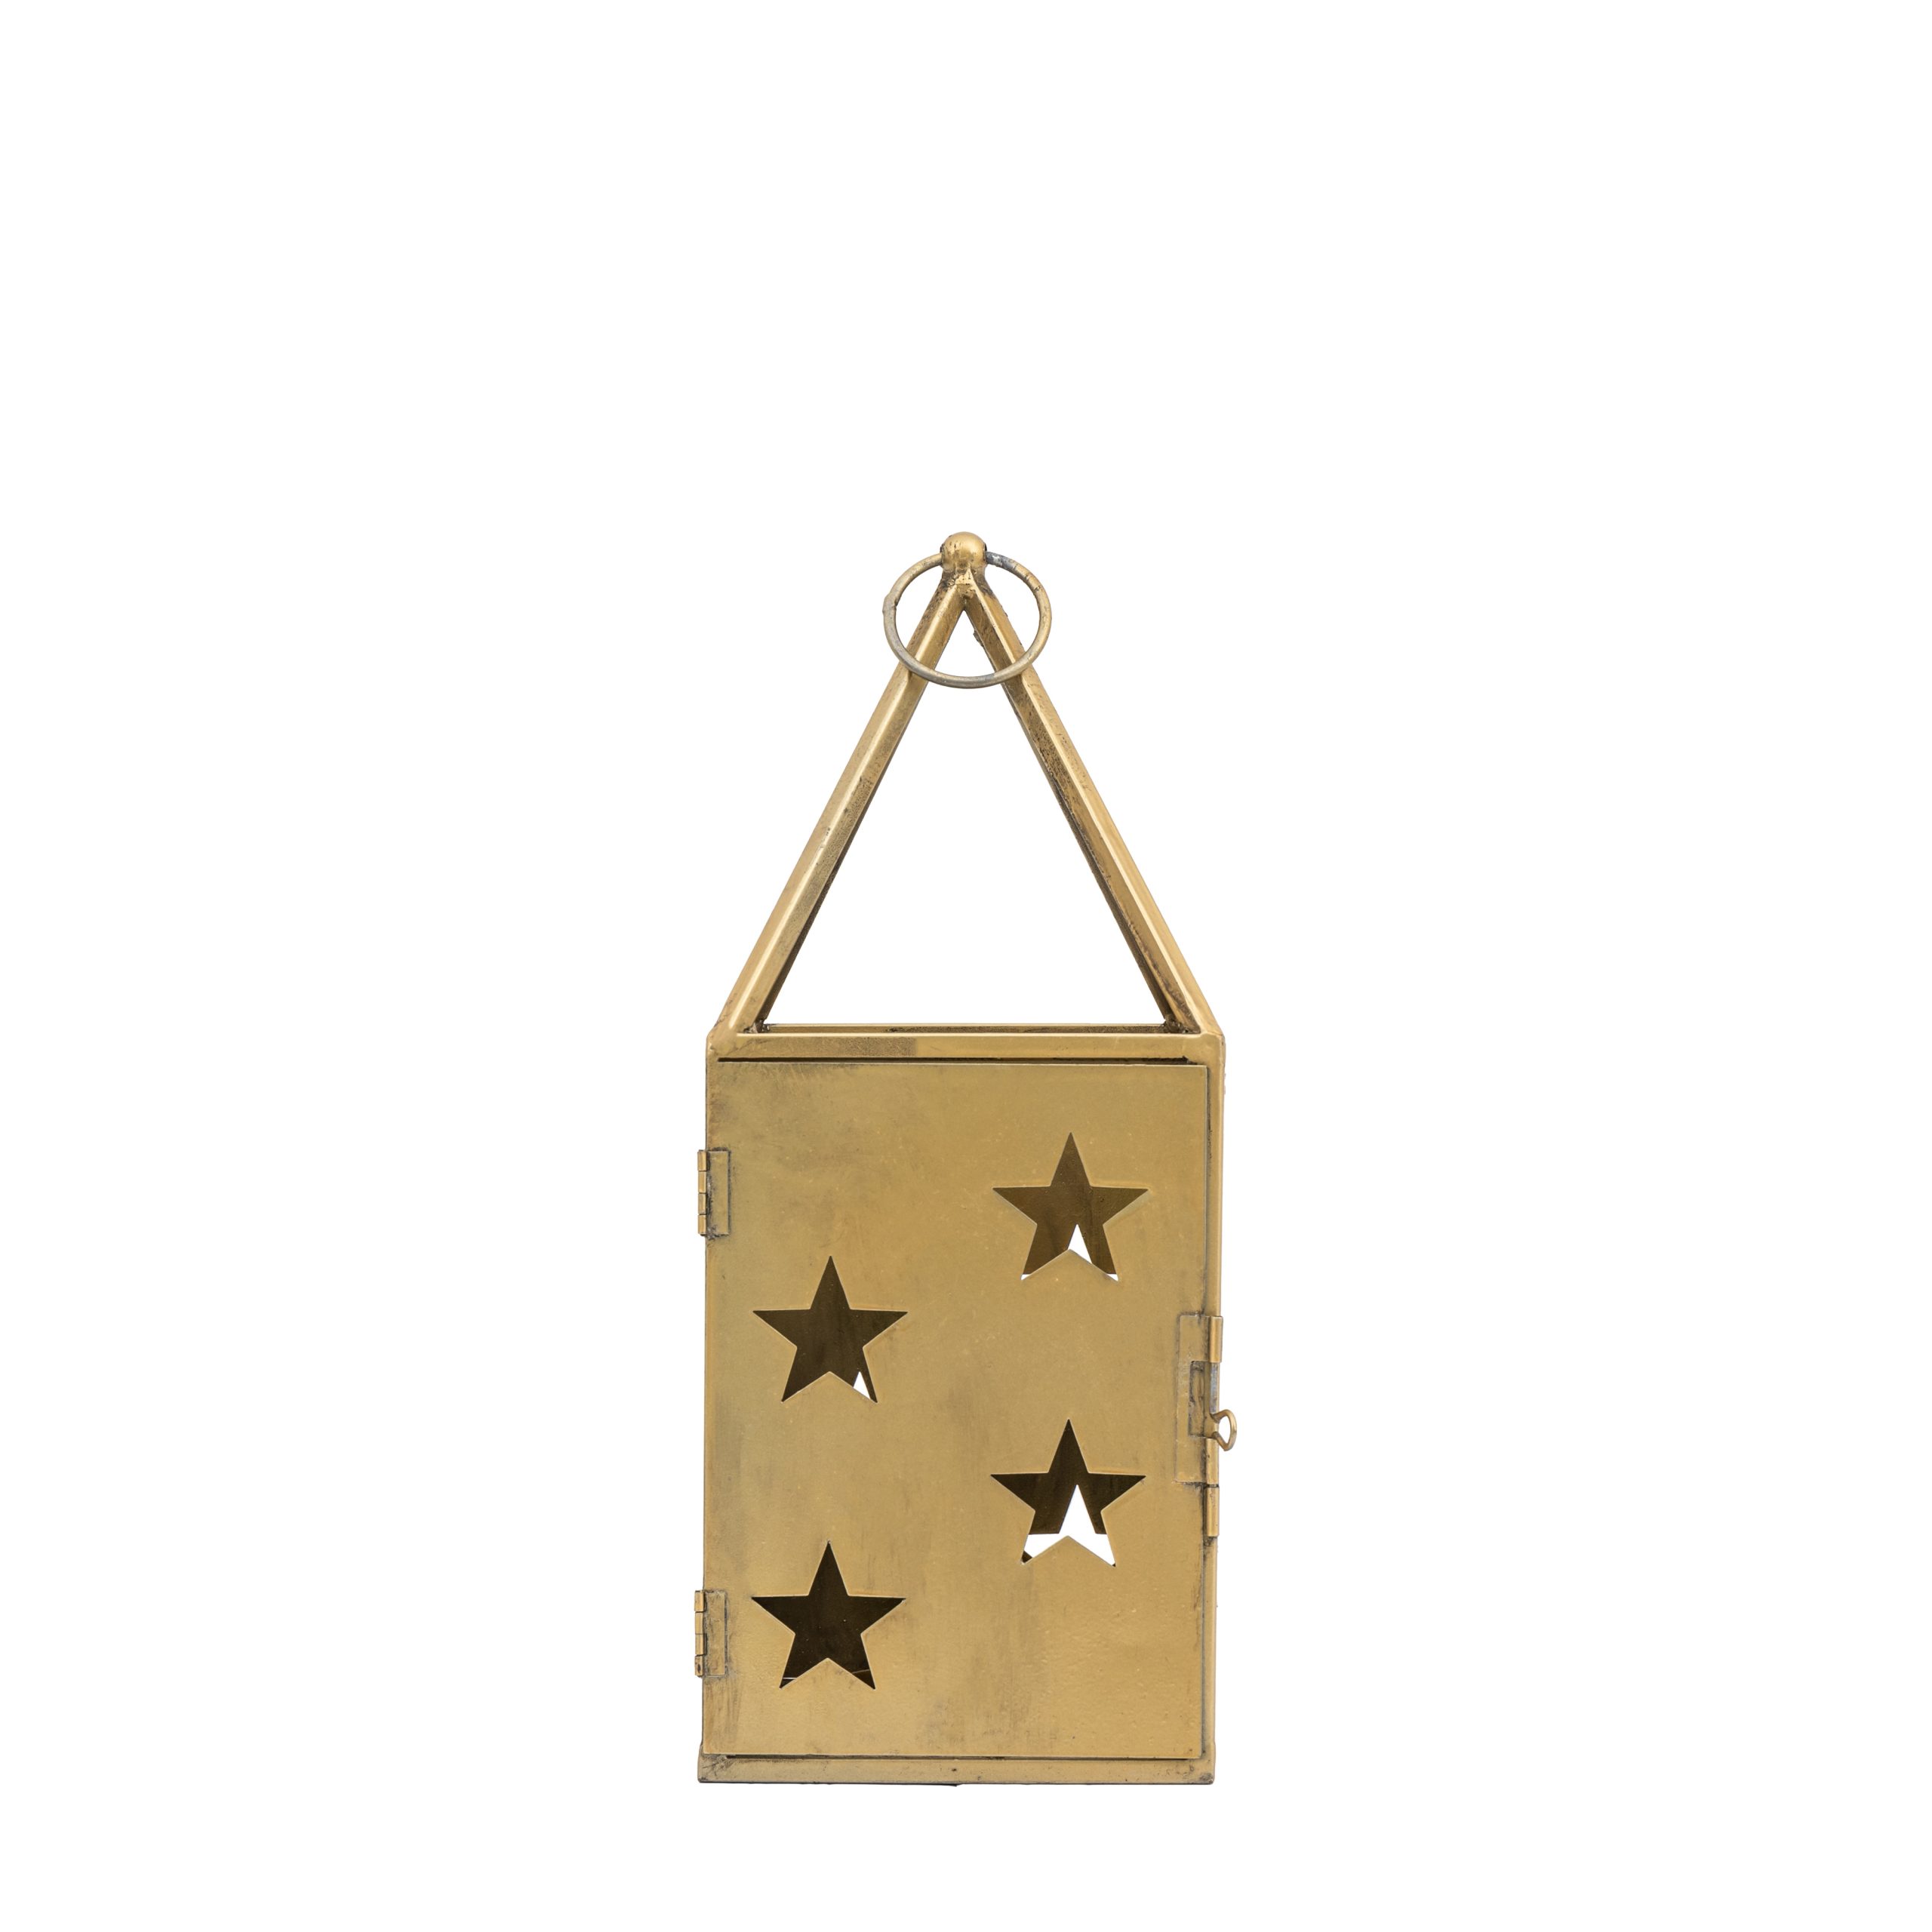 Gallery Direct Starry Lantern Large Antique Gold